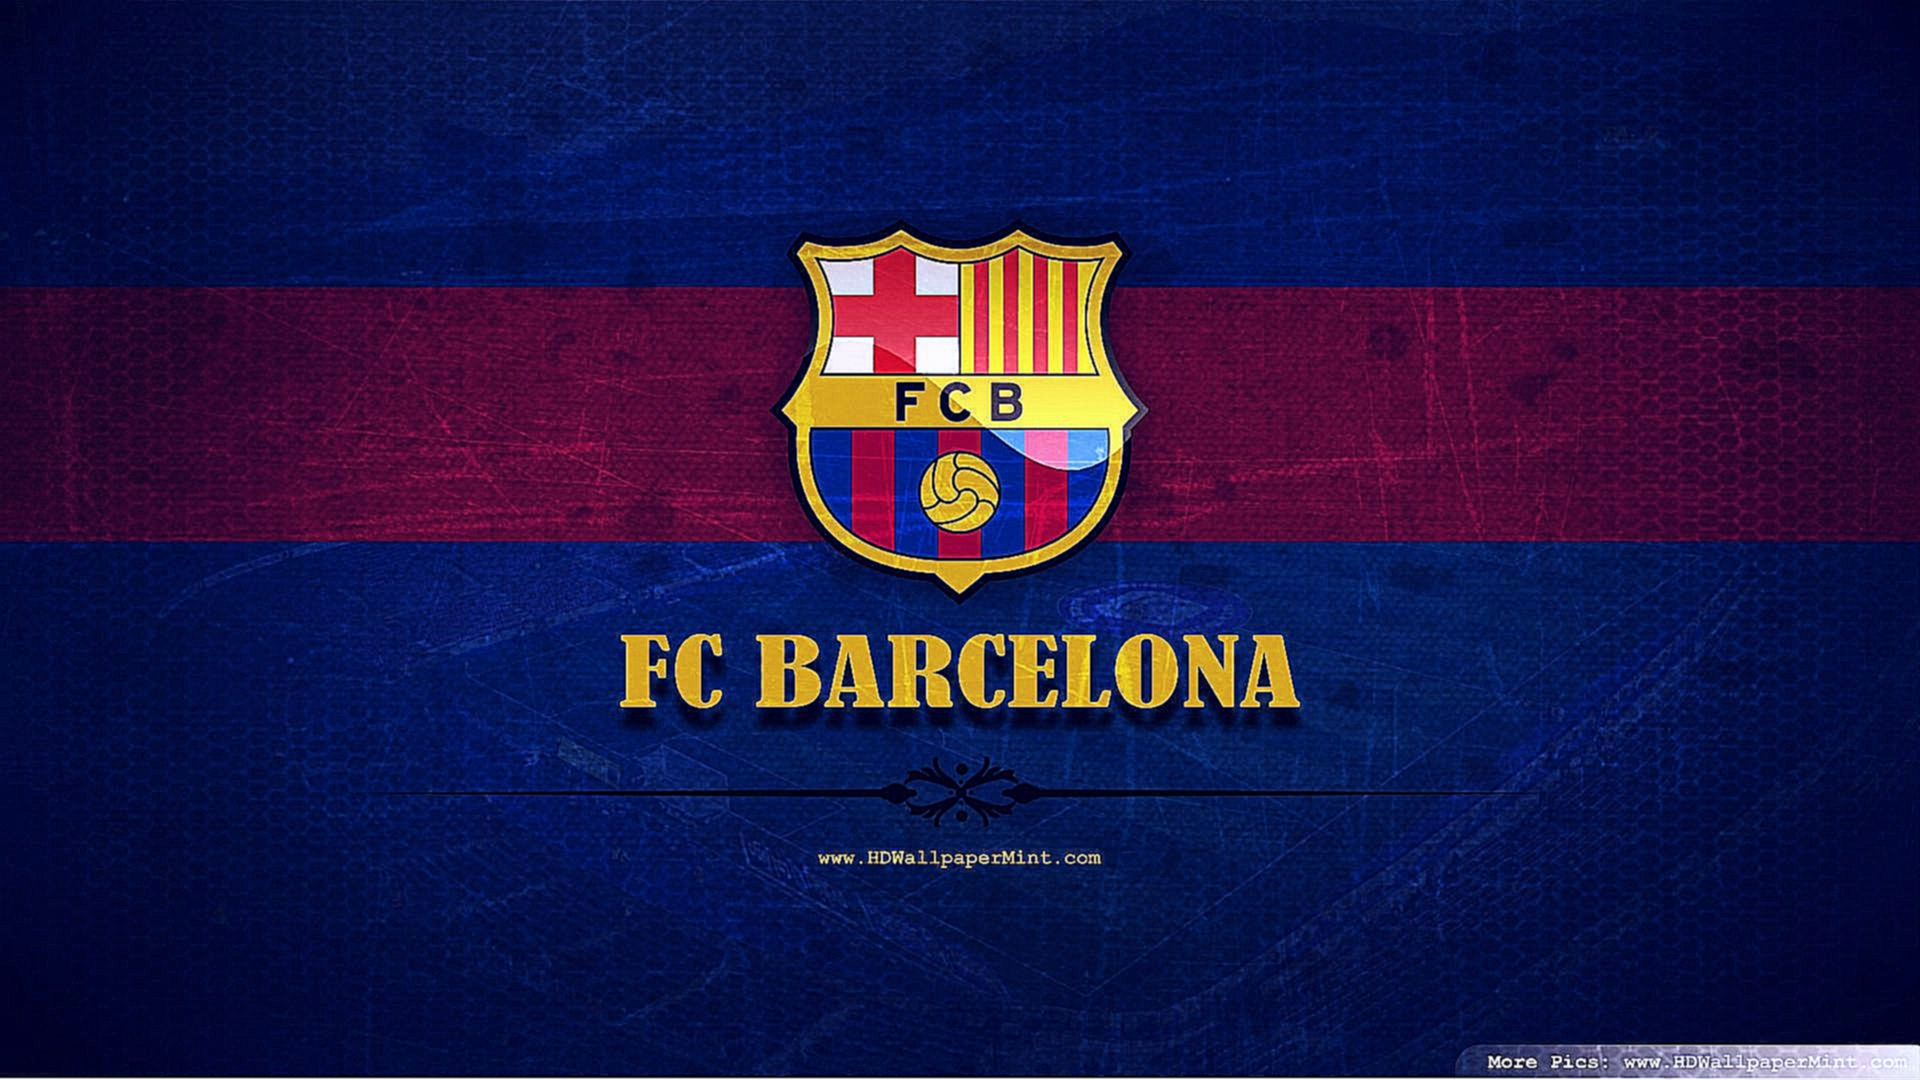 Download Barcelona Wallpapers Widescreen Full Size.